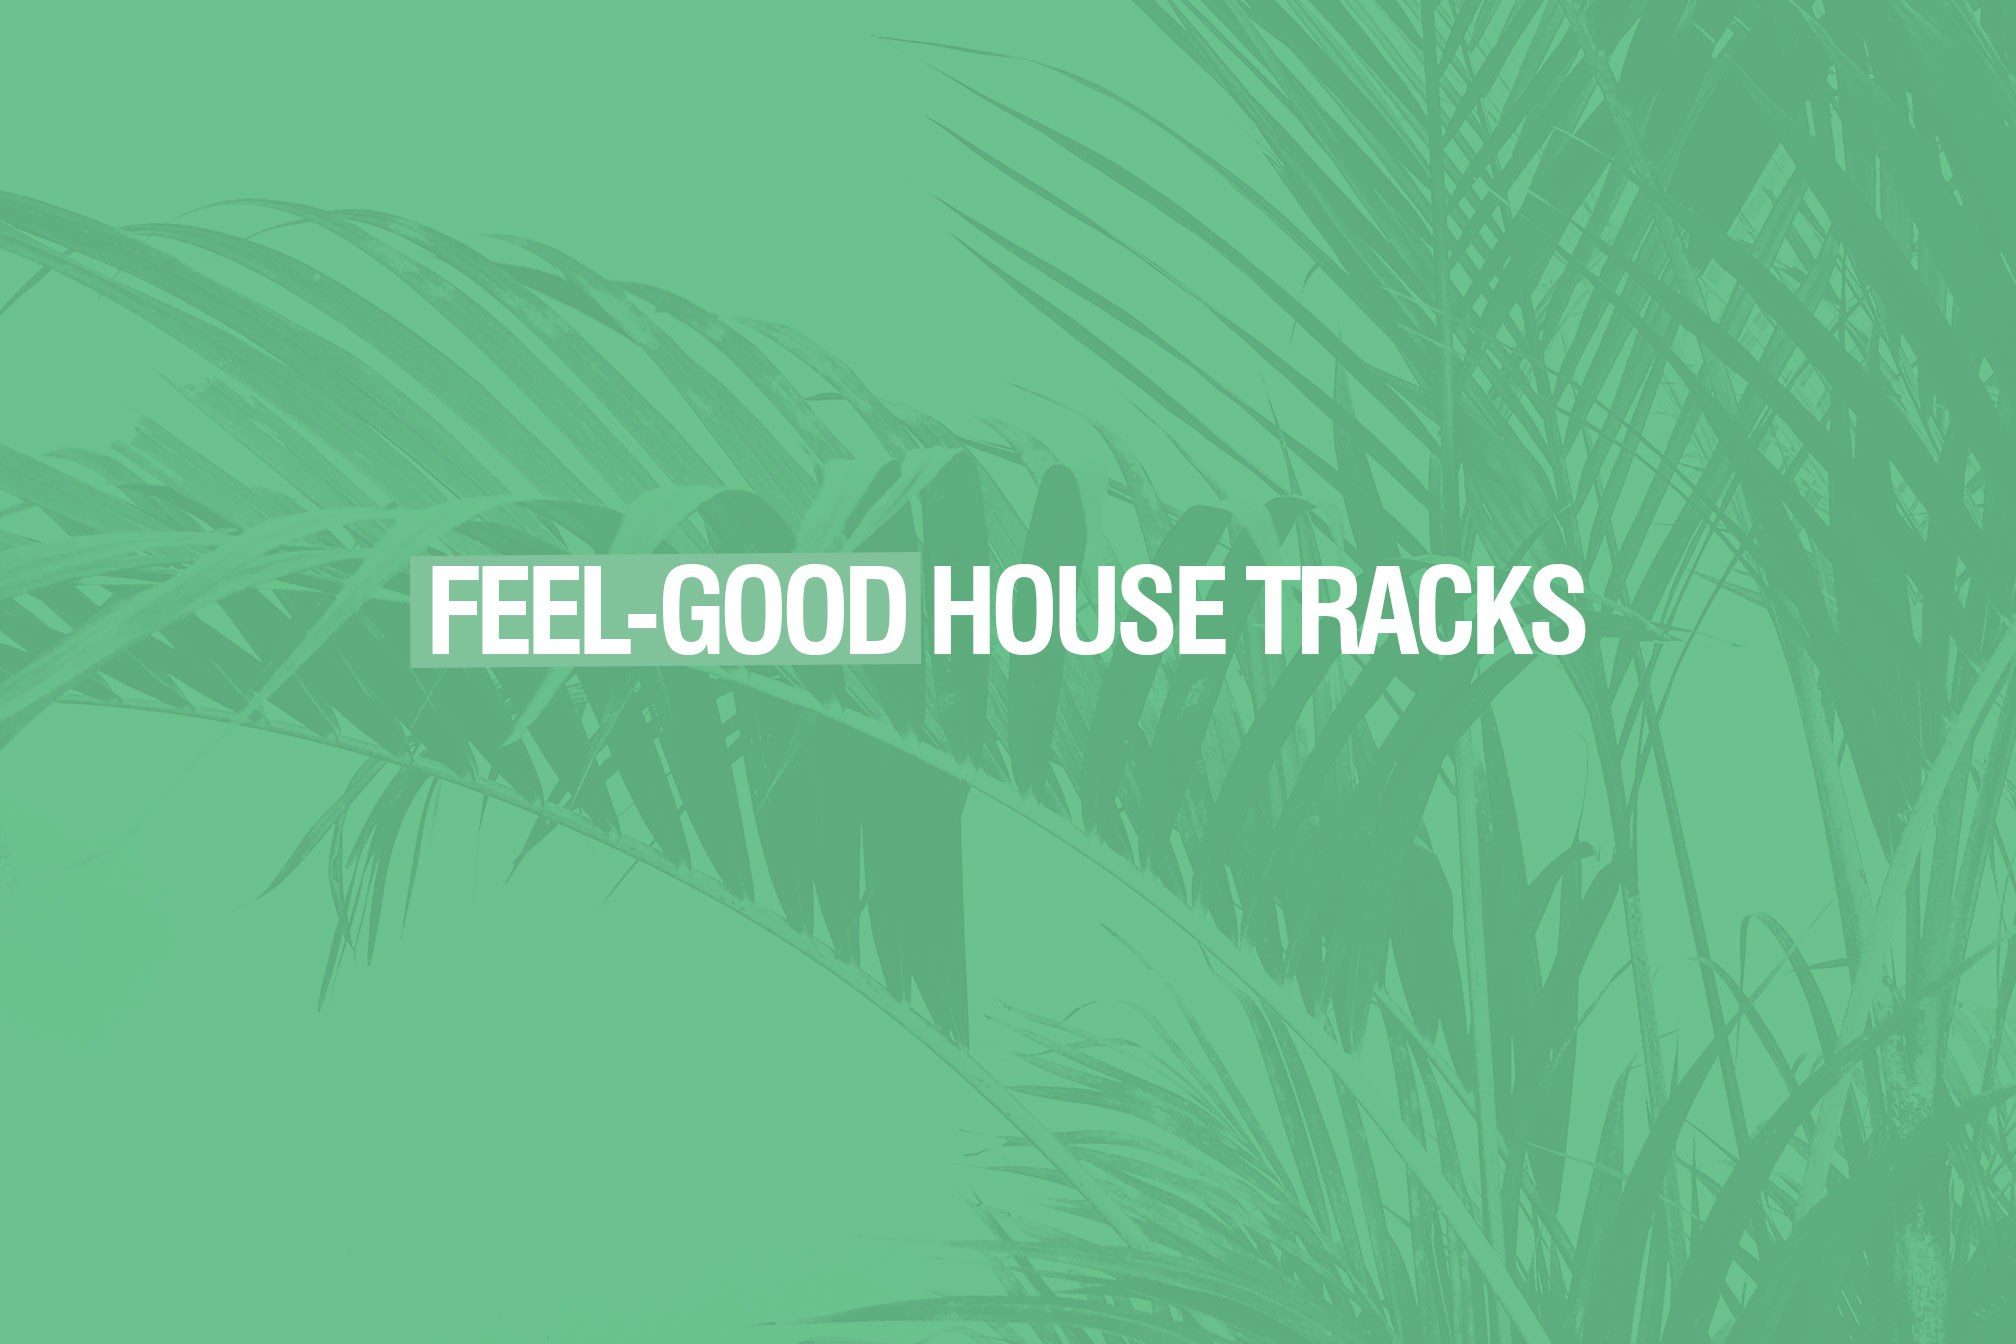 14 of the best house tracks - -